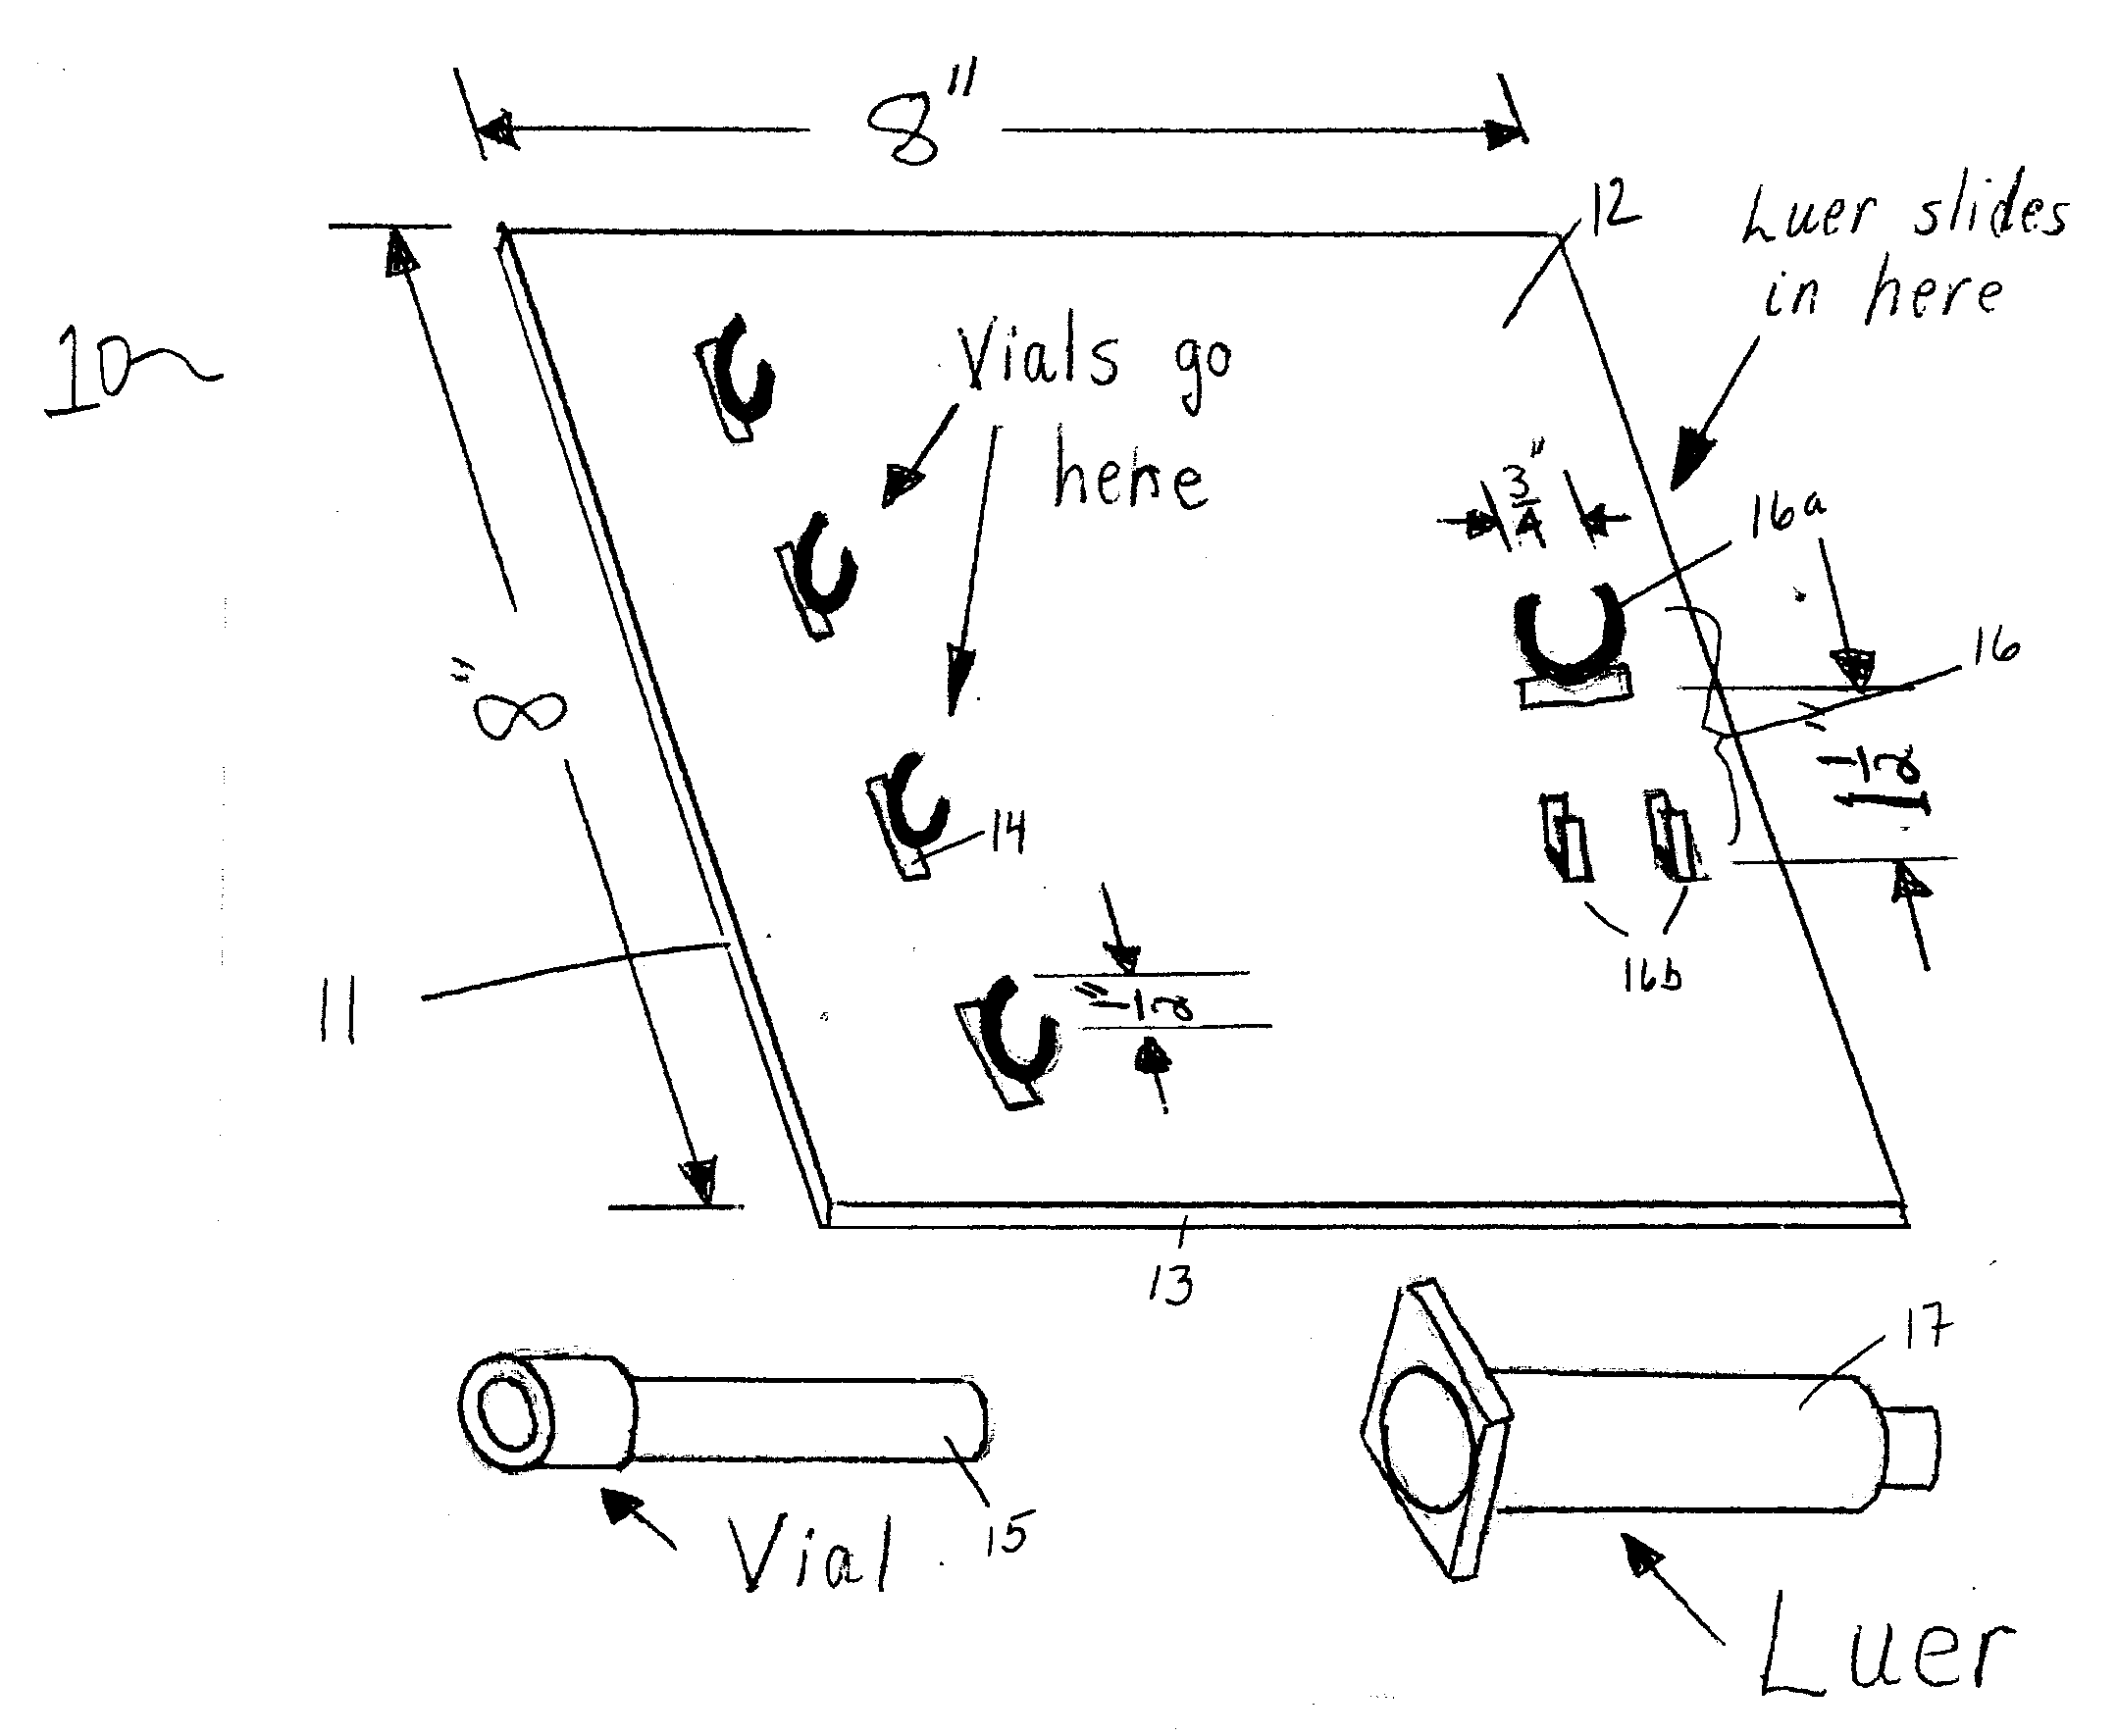 Apparatus and method for drawing samples of blood